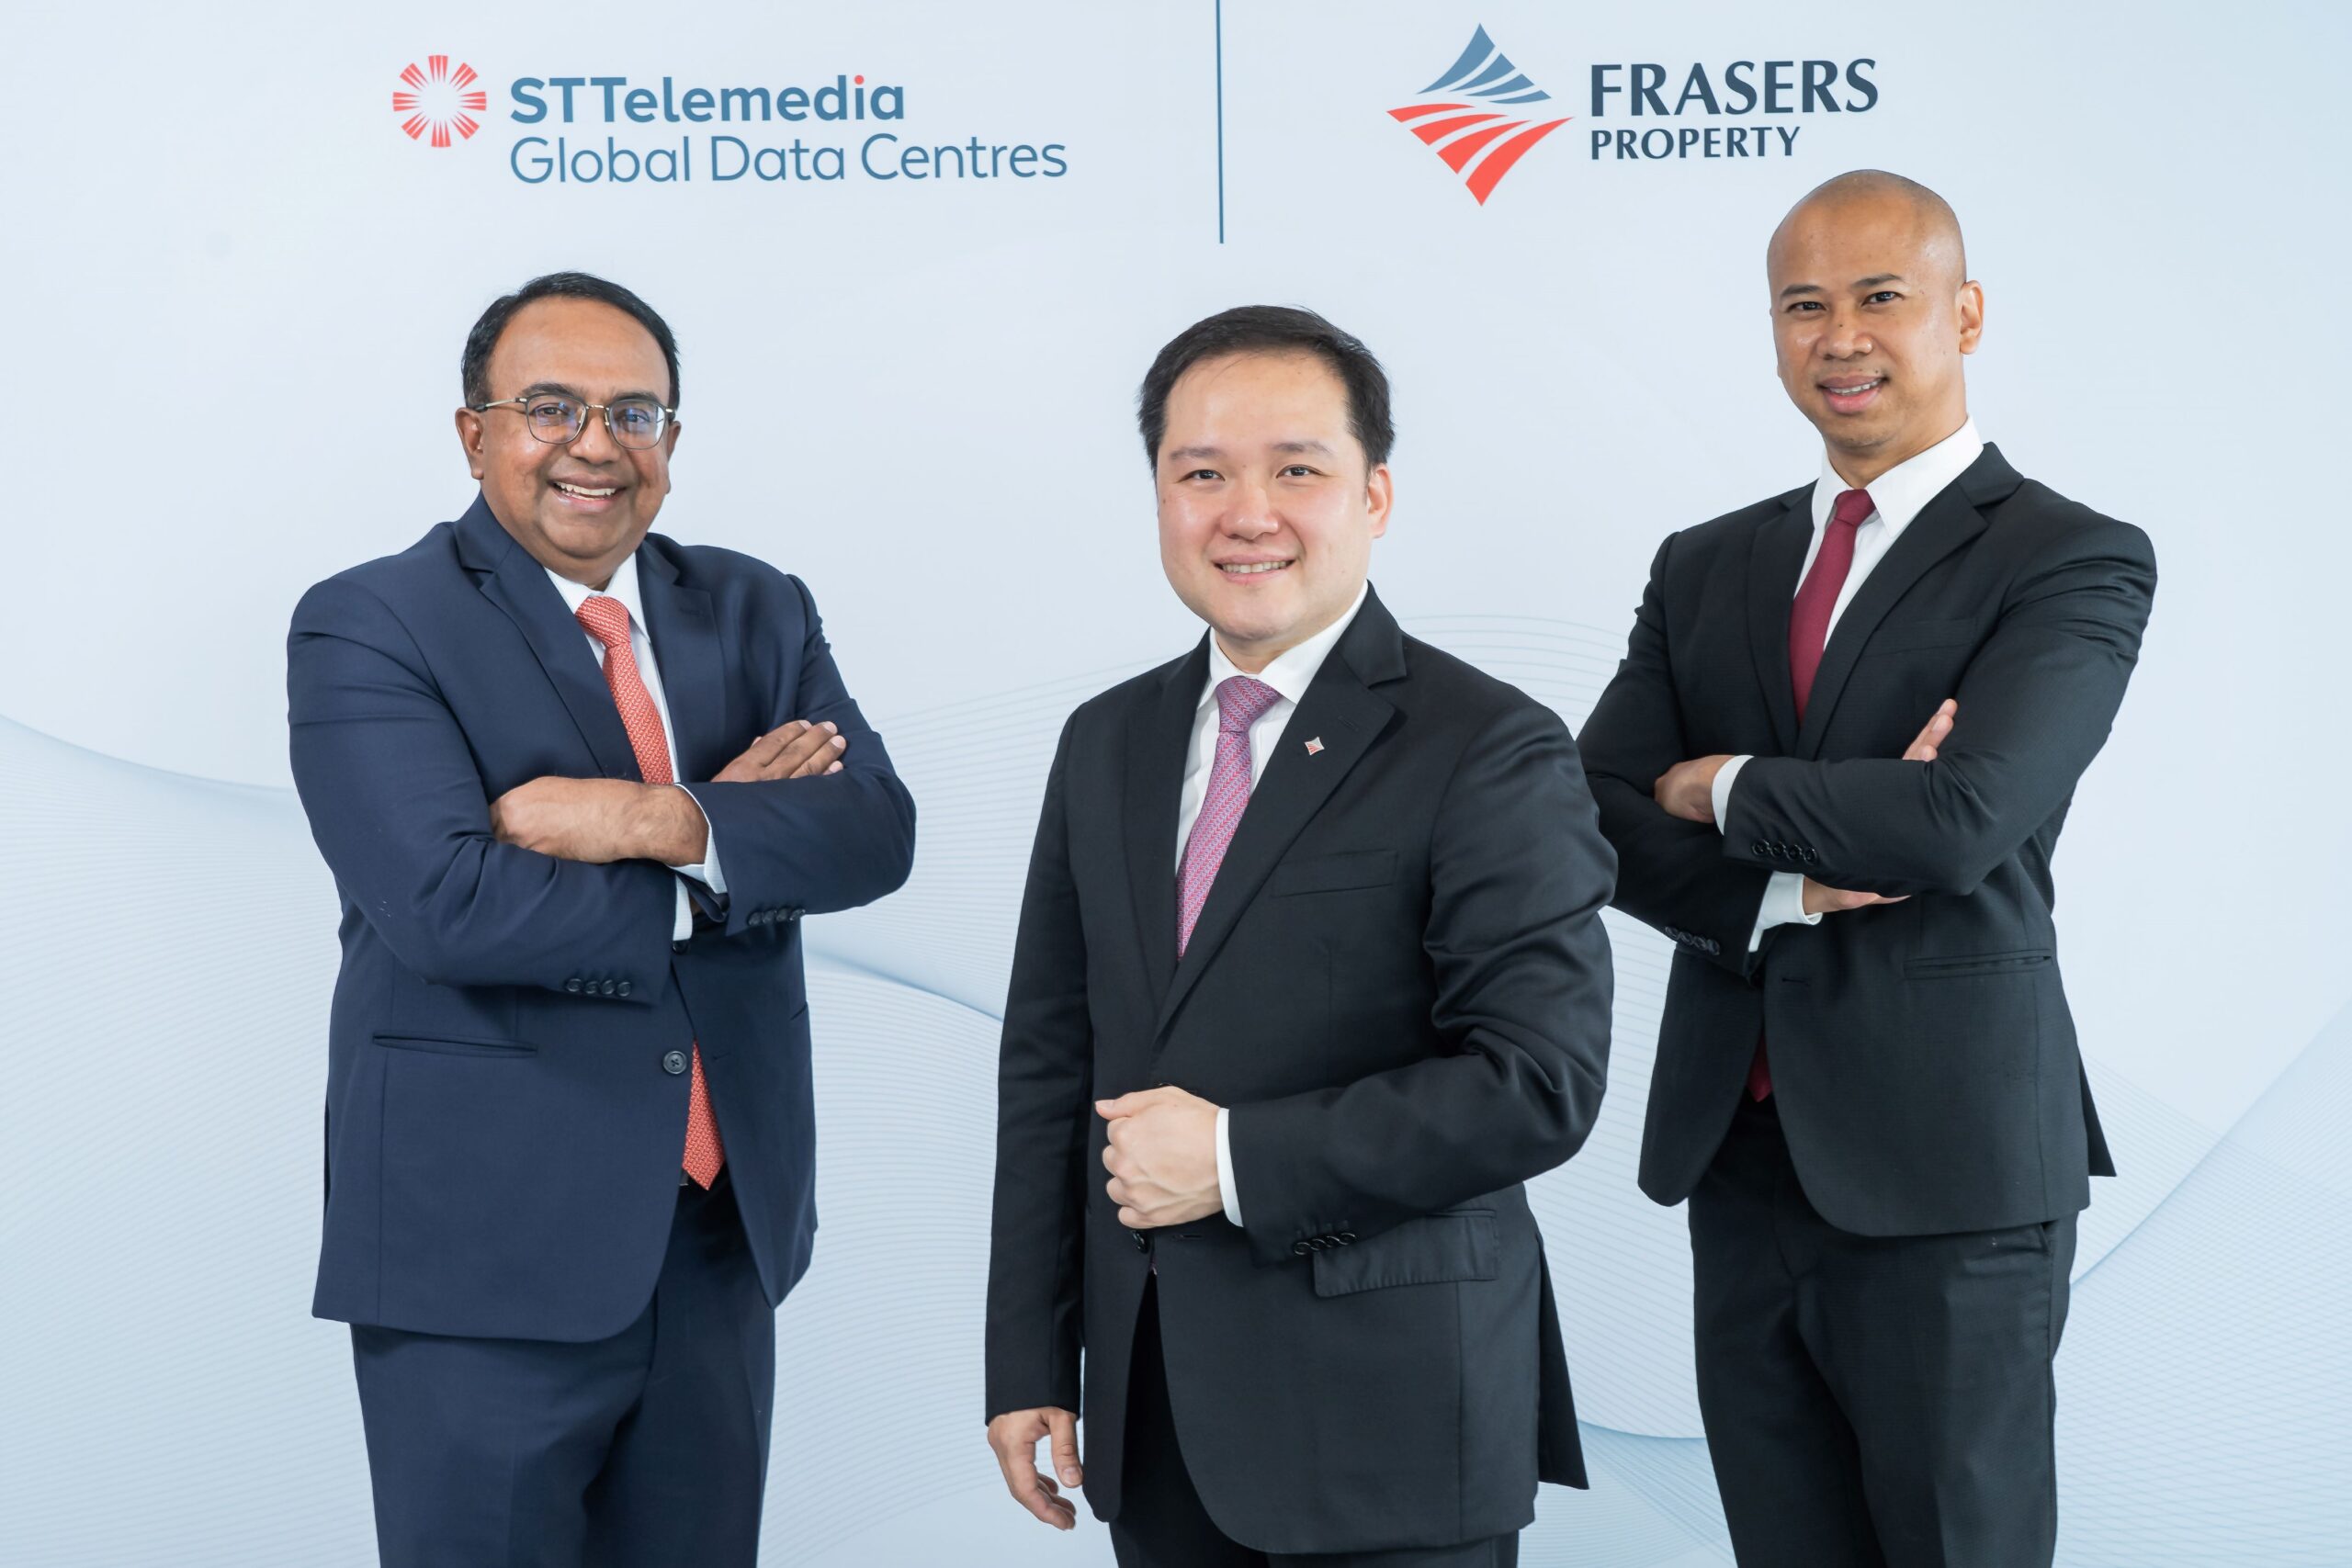 From left to right: Mr Bruno Lopez, President and Group CEO of ST Telemedia Global Data Centres, Mr Panote Sirivadhanabhakdi, Group CEO of Frasers Property Limited, Mr Supparat Sivapetchranat Singhara na Ayutthaya, CEO of ST Telemedia Global Data Centres (Thailand)